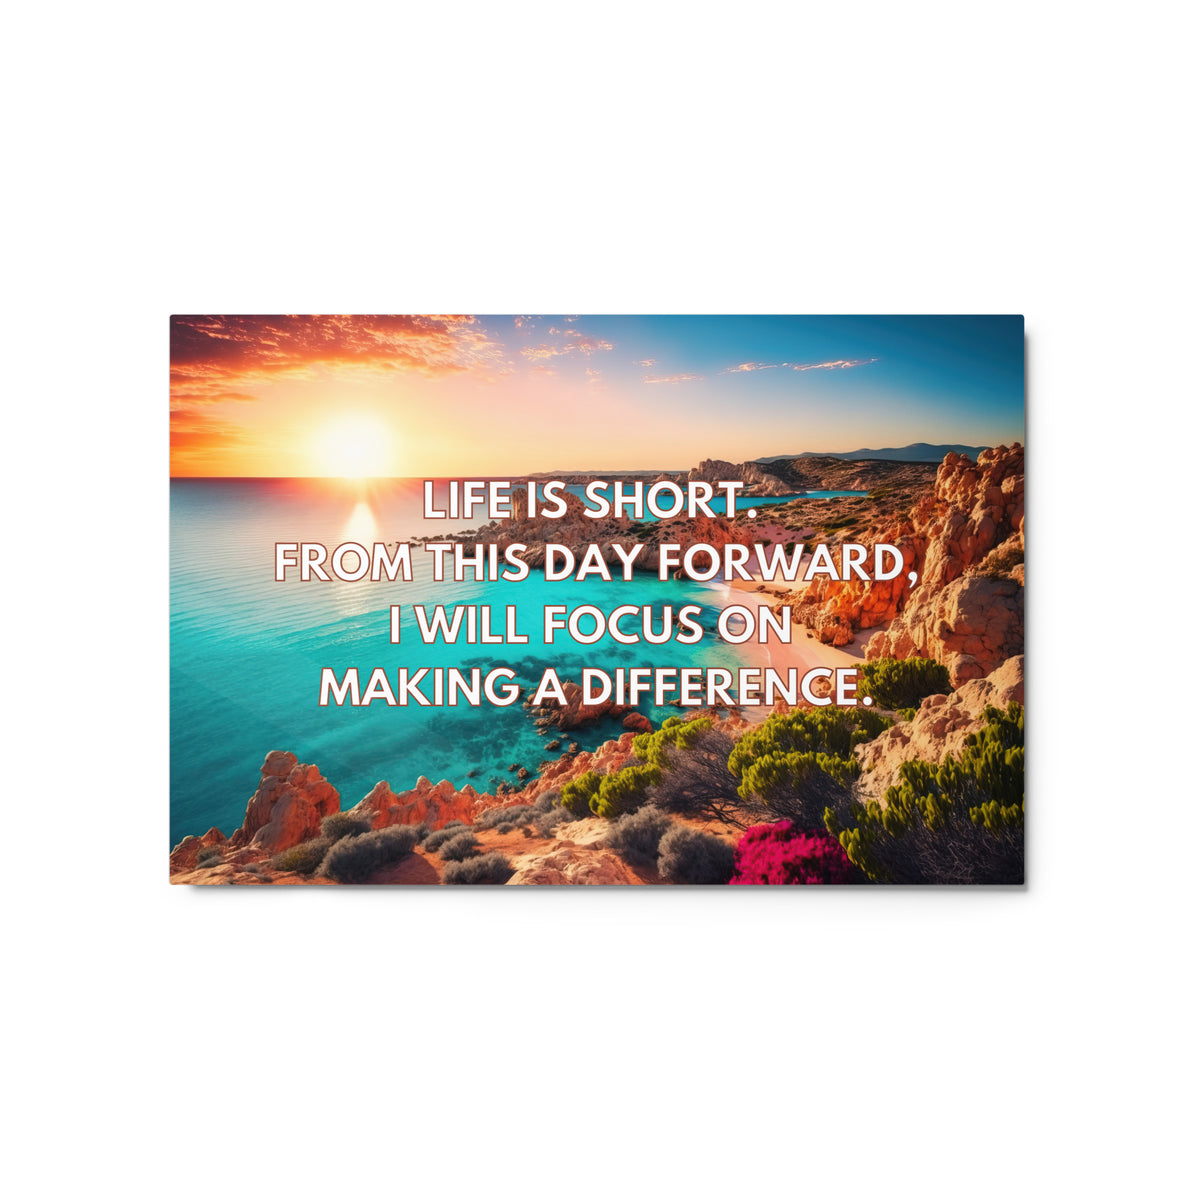 Life is short. From this day forward, I will focus on making a difference. | Glossy Metal Print  Success Acceleration Tools